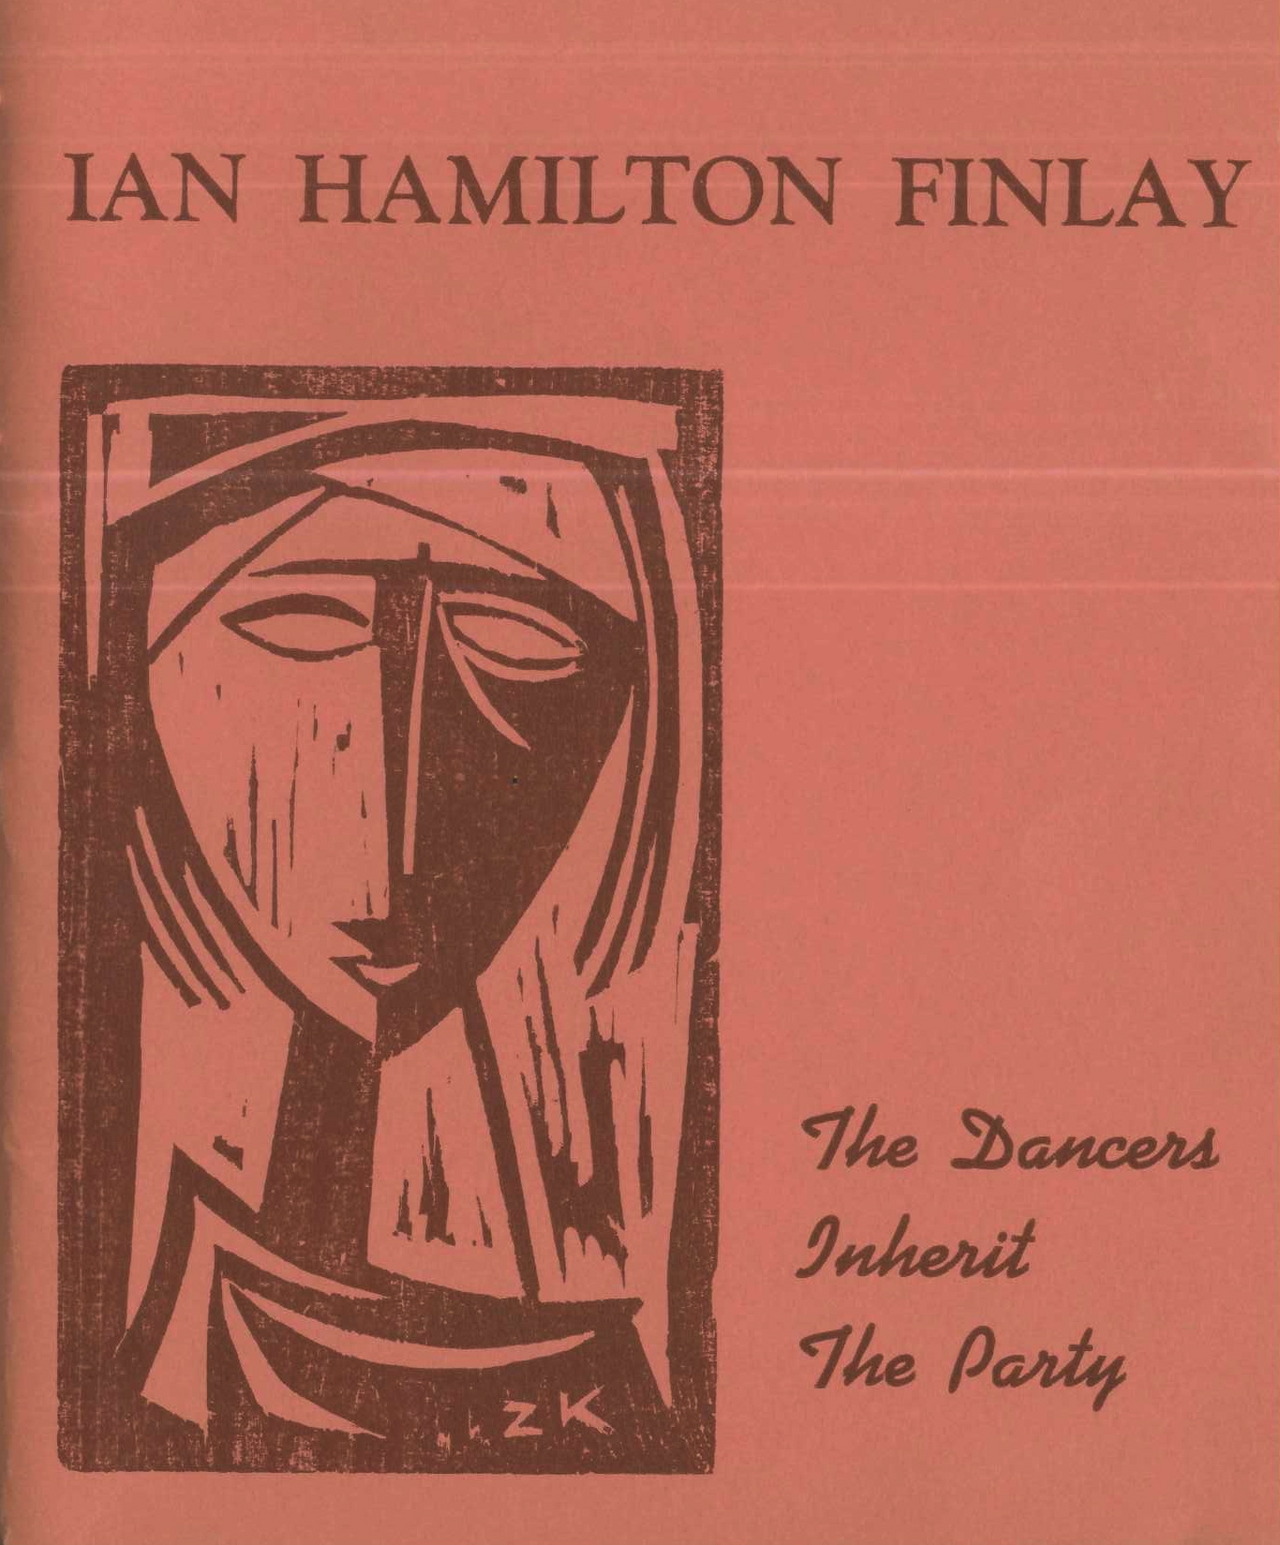 Finlay, Ian Hamilton.: The dancers inherit the party. (1969, Fulcrum P.)